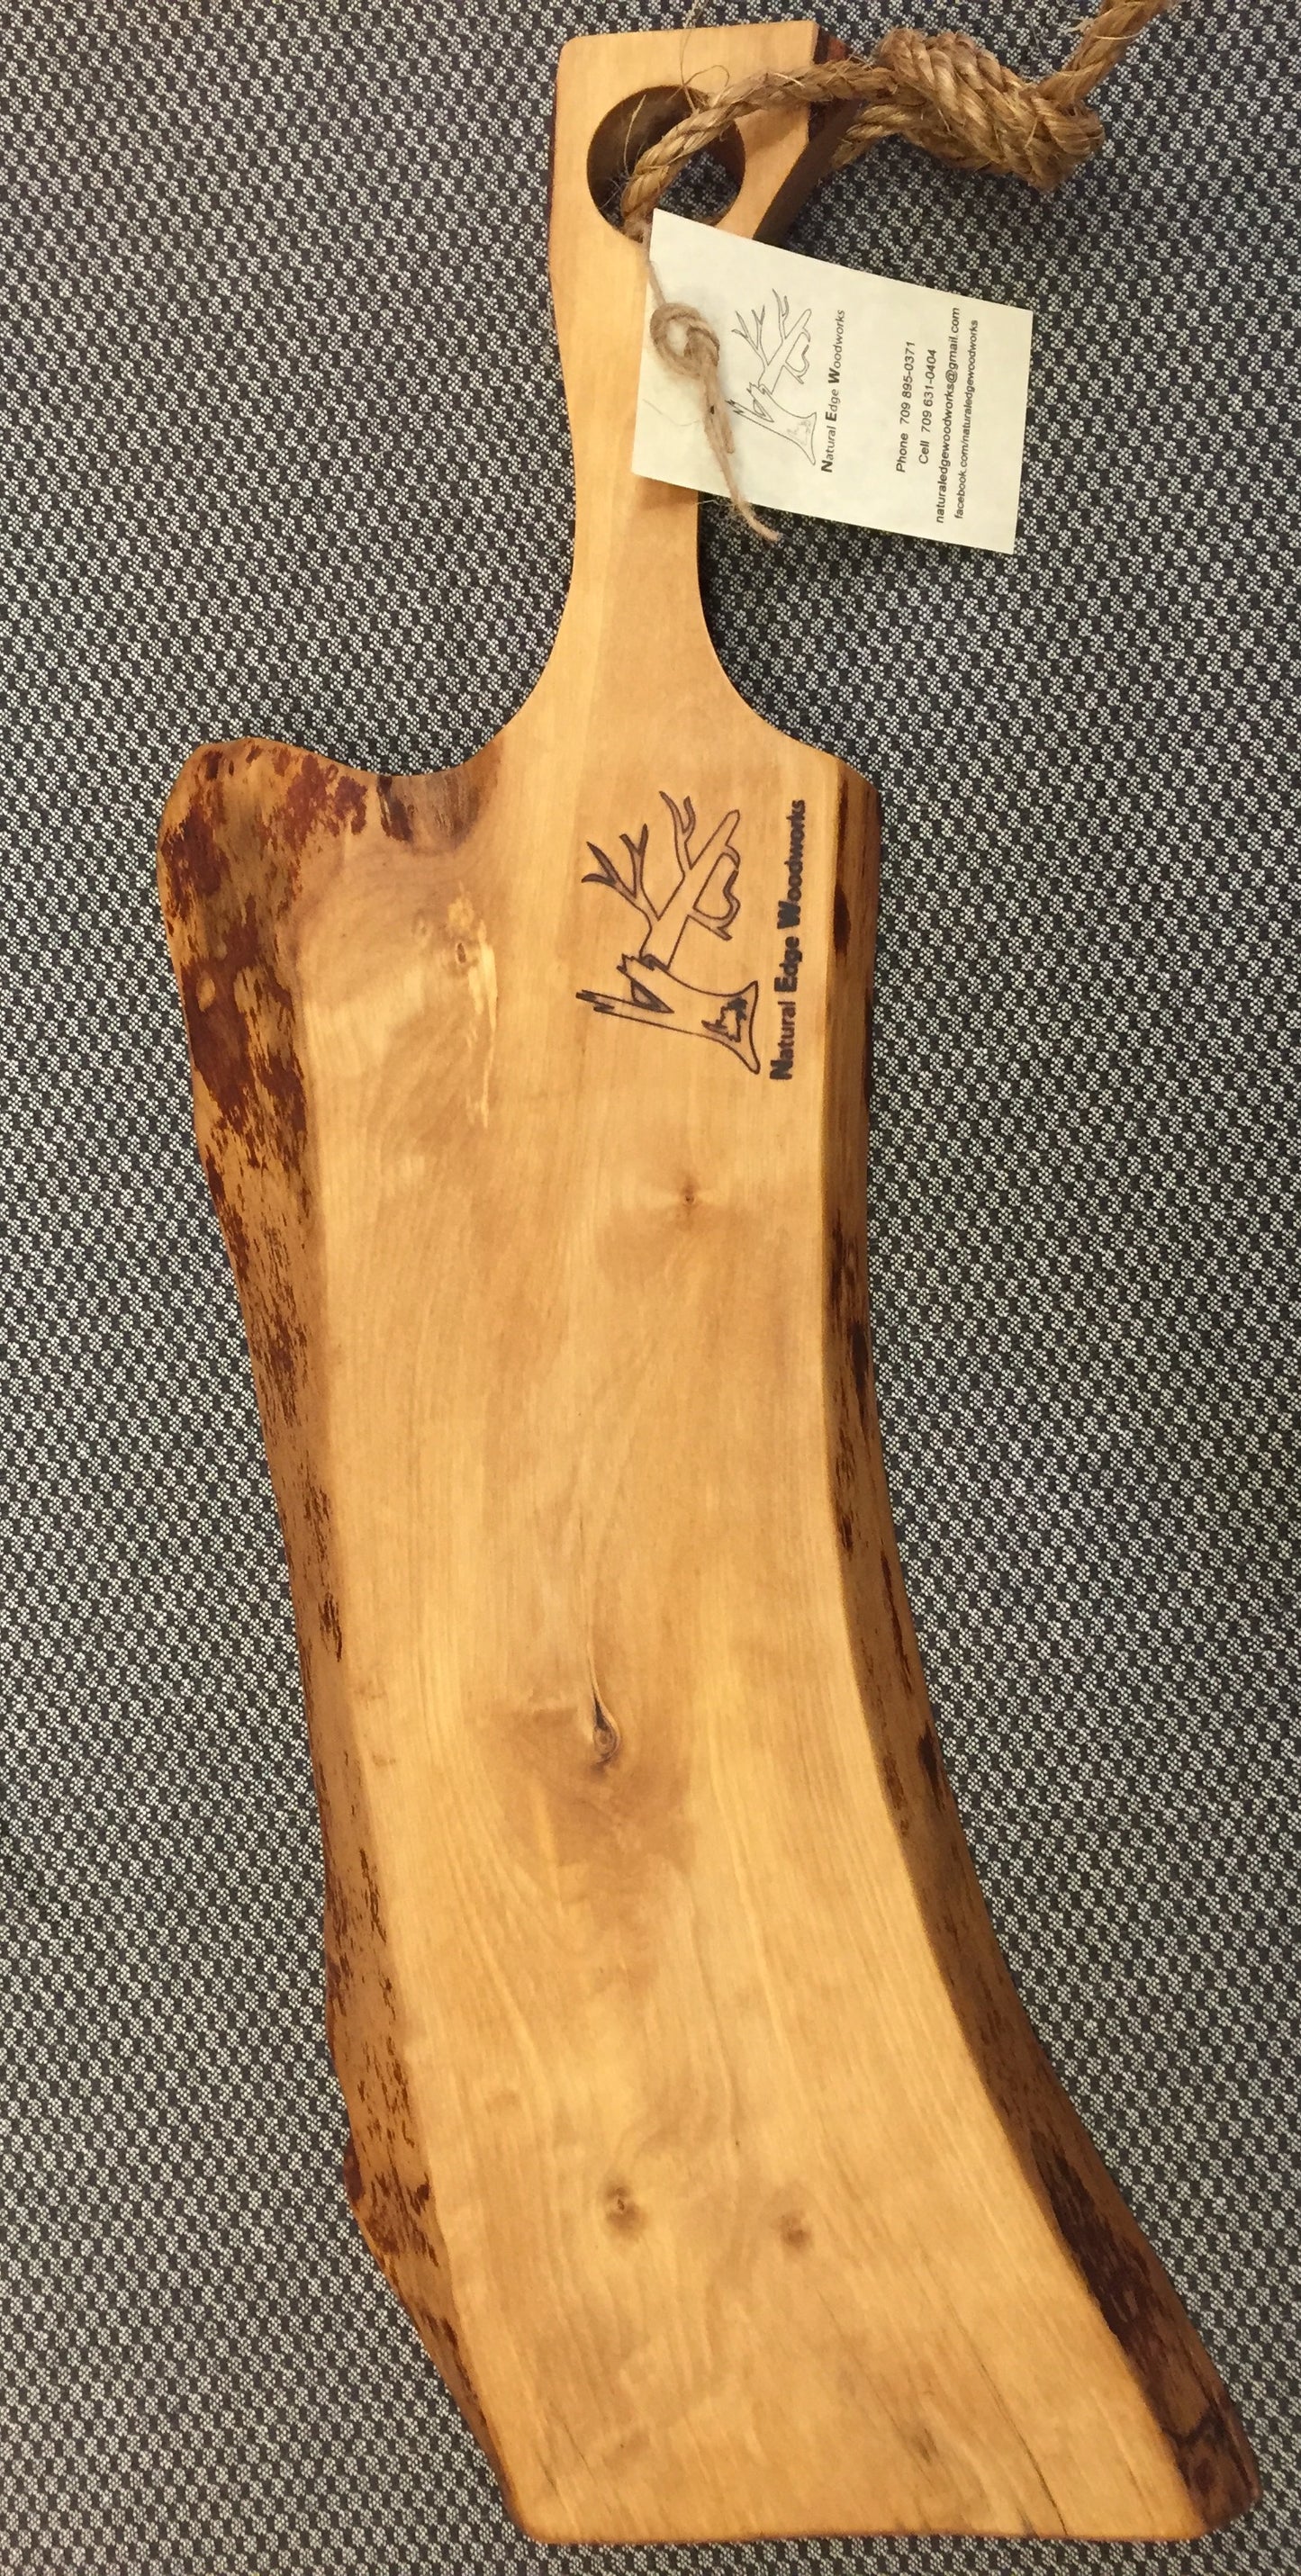 Natural Edge Serving Boards Made from Salvaged Newfoundland Wood